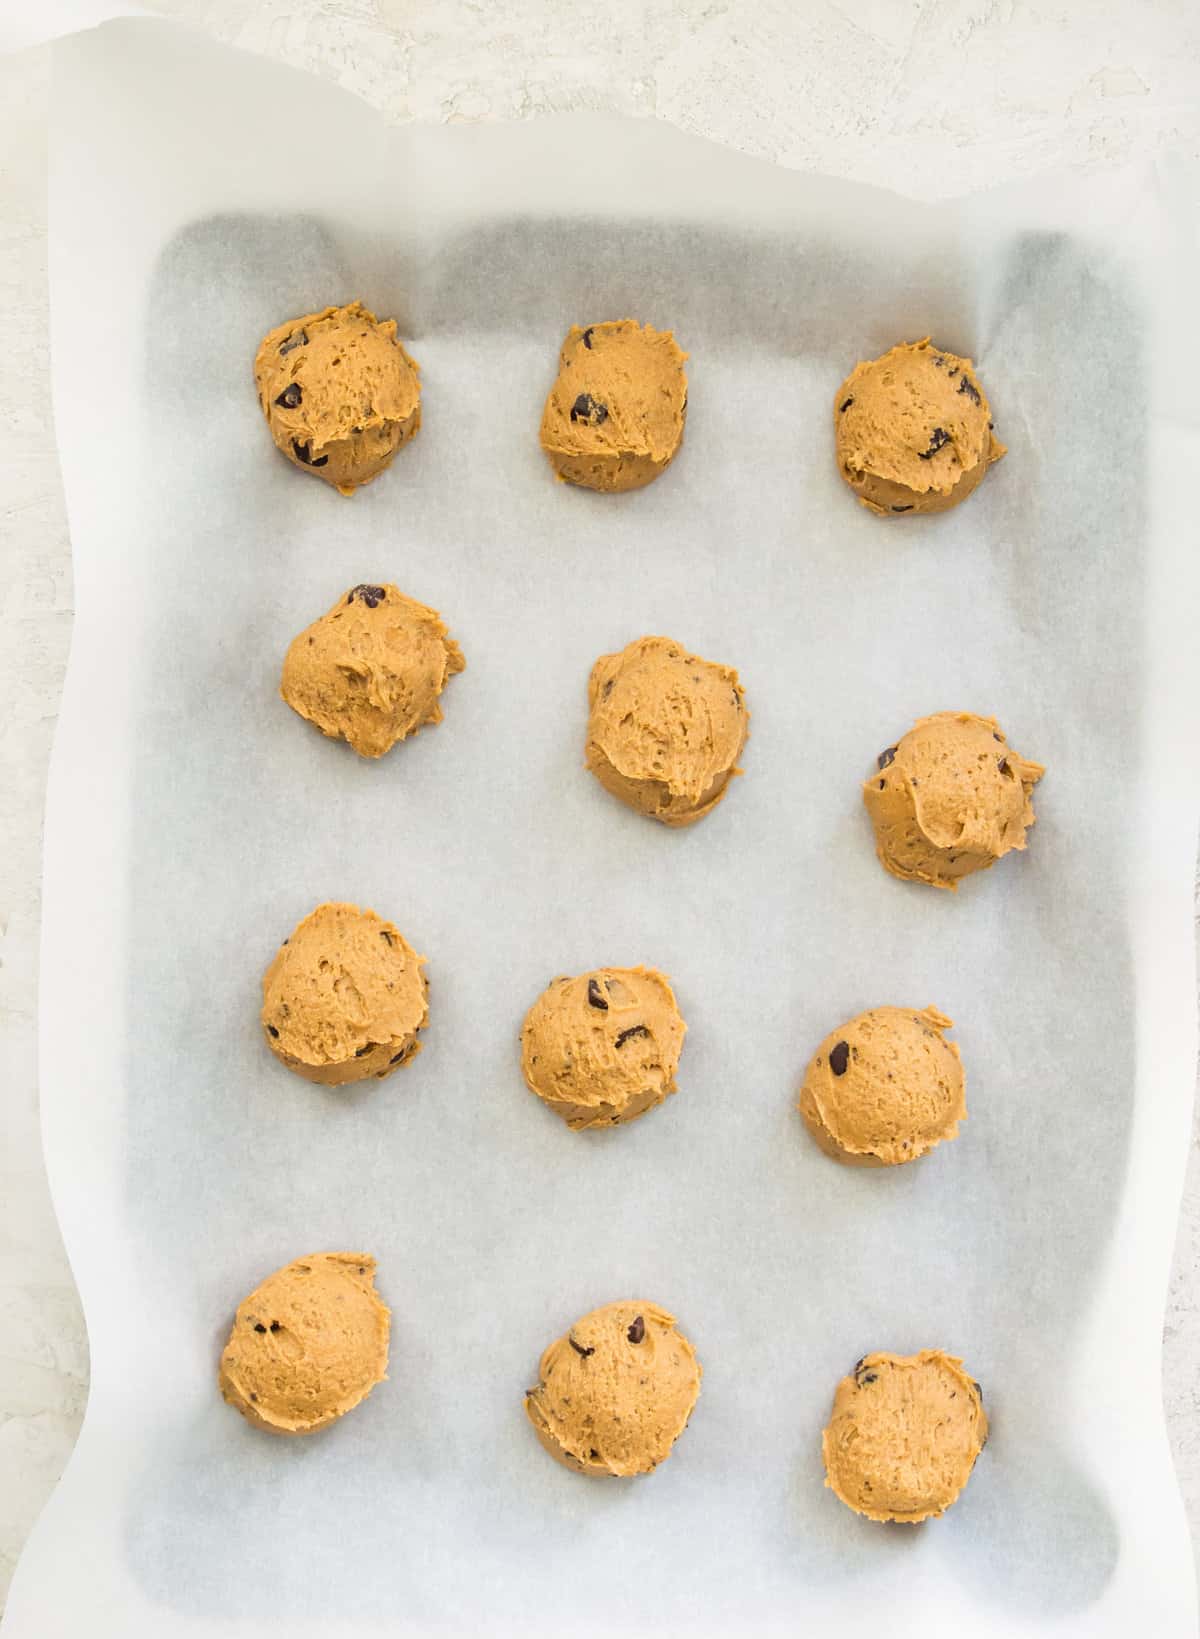 Cookie dough on a baking sheet lined with parchment paper.